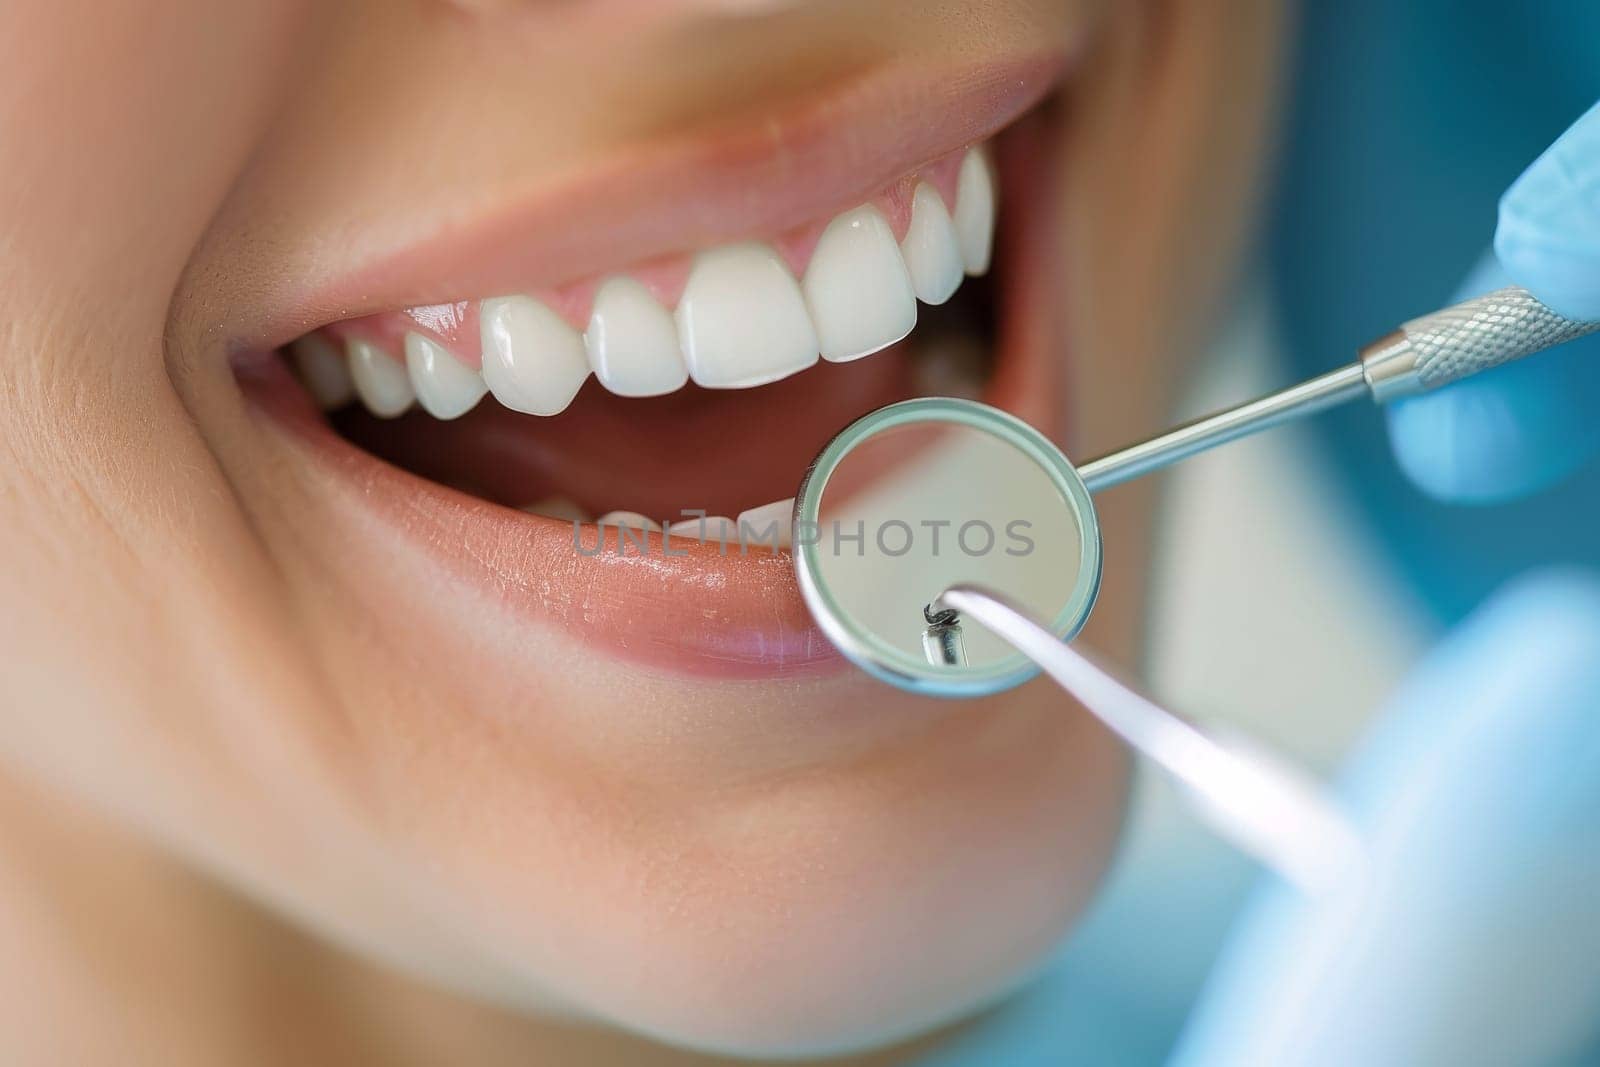 A woman is smiling and has her teeth cleaned by a dentist. Concept of trust and comfort between the patient and the dentist, as well as the importance of maintaining good oral hygiene